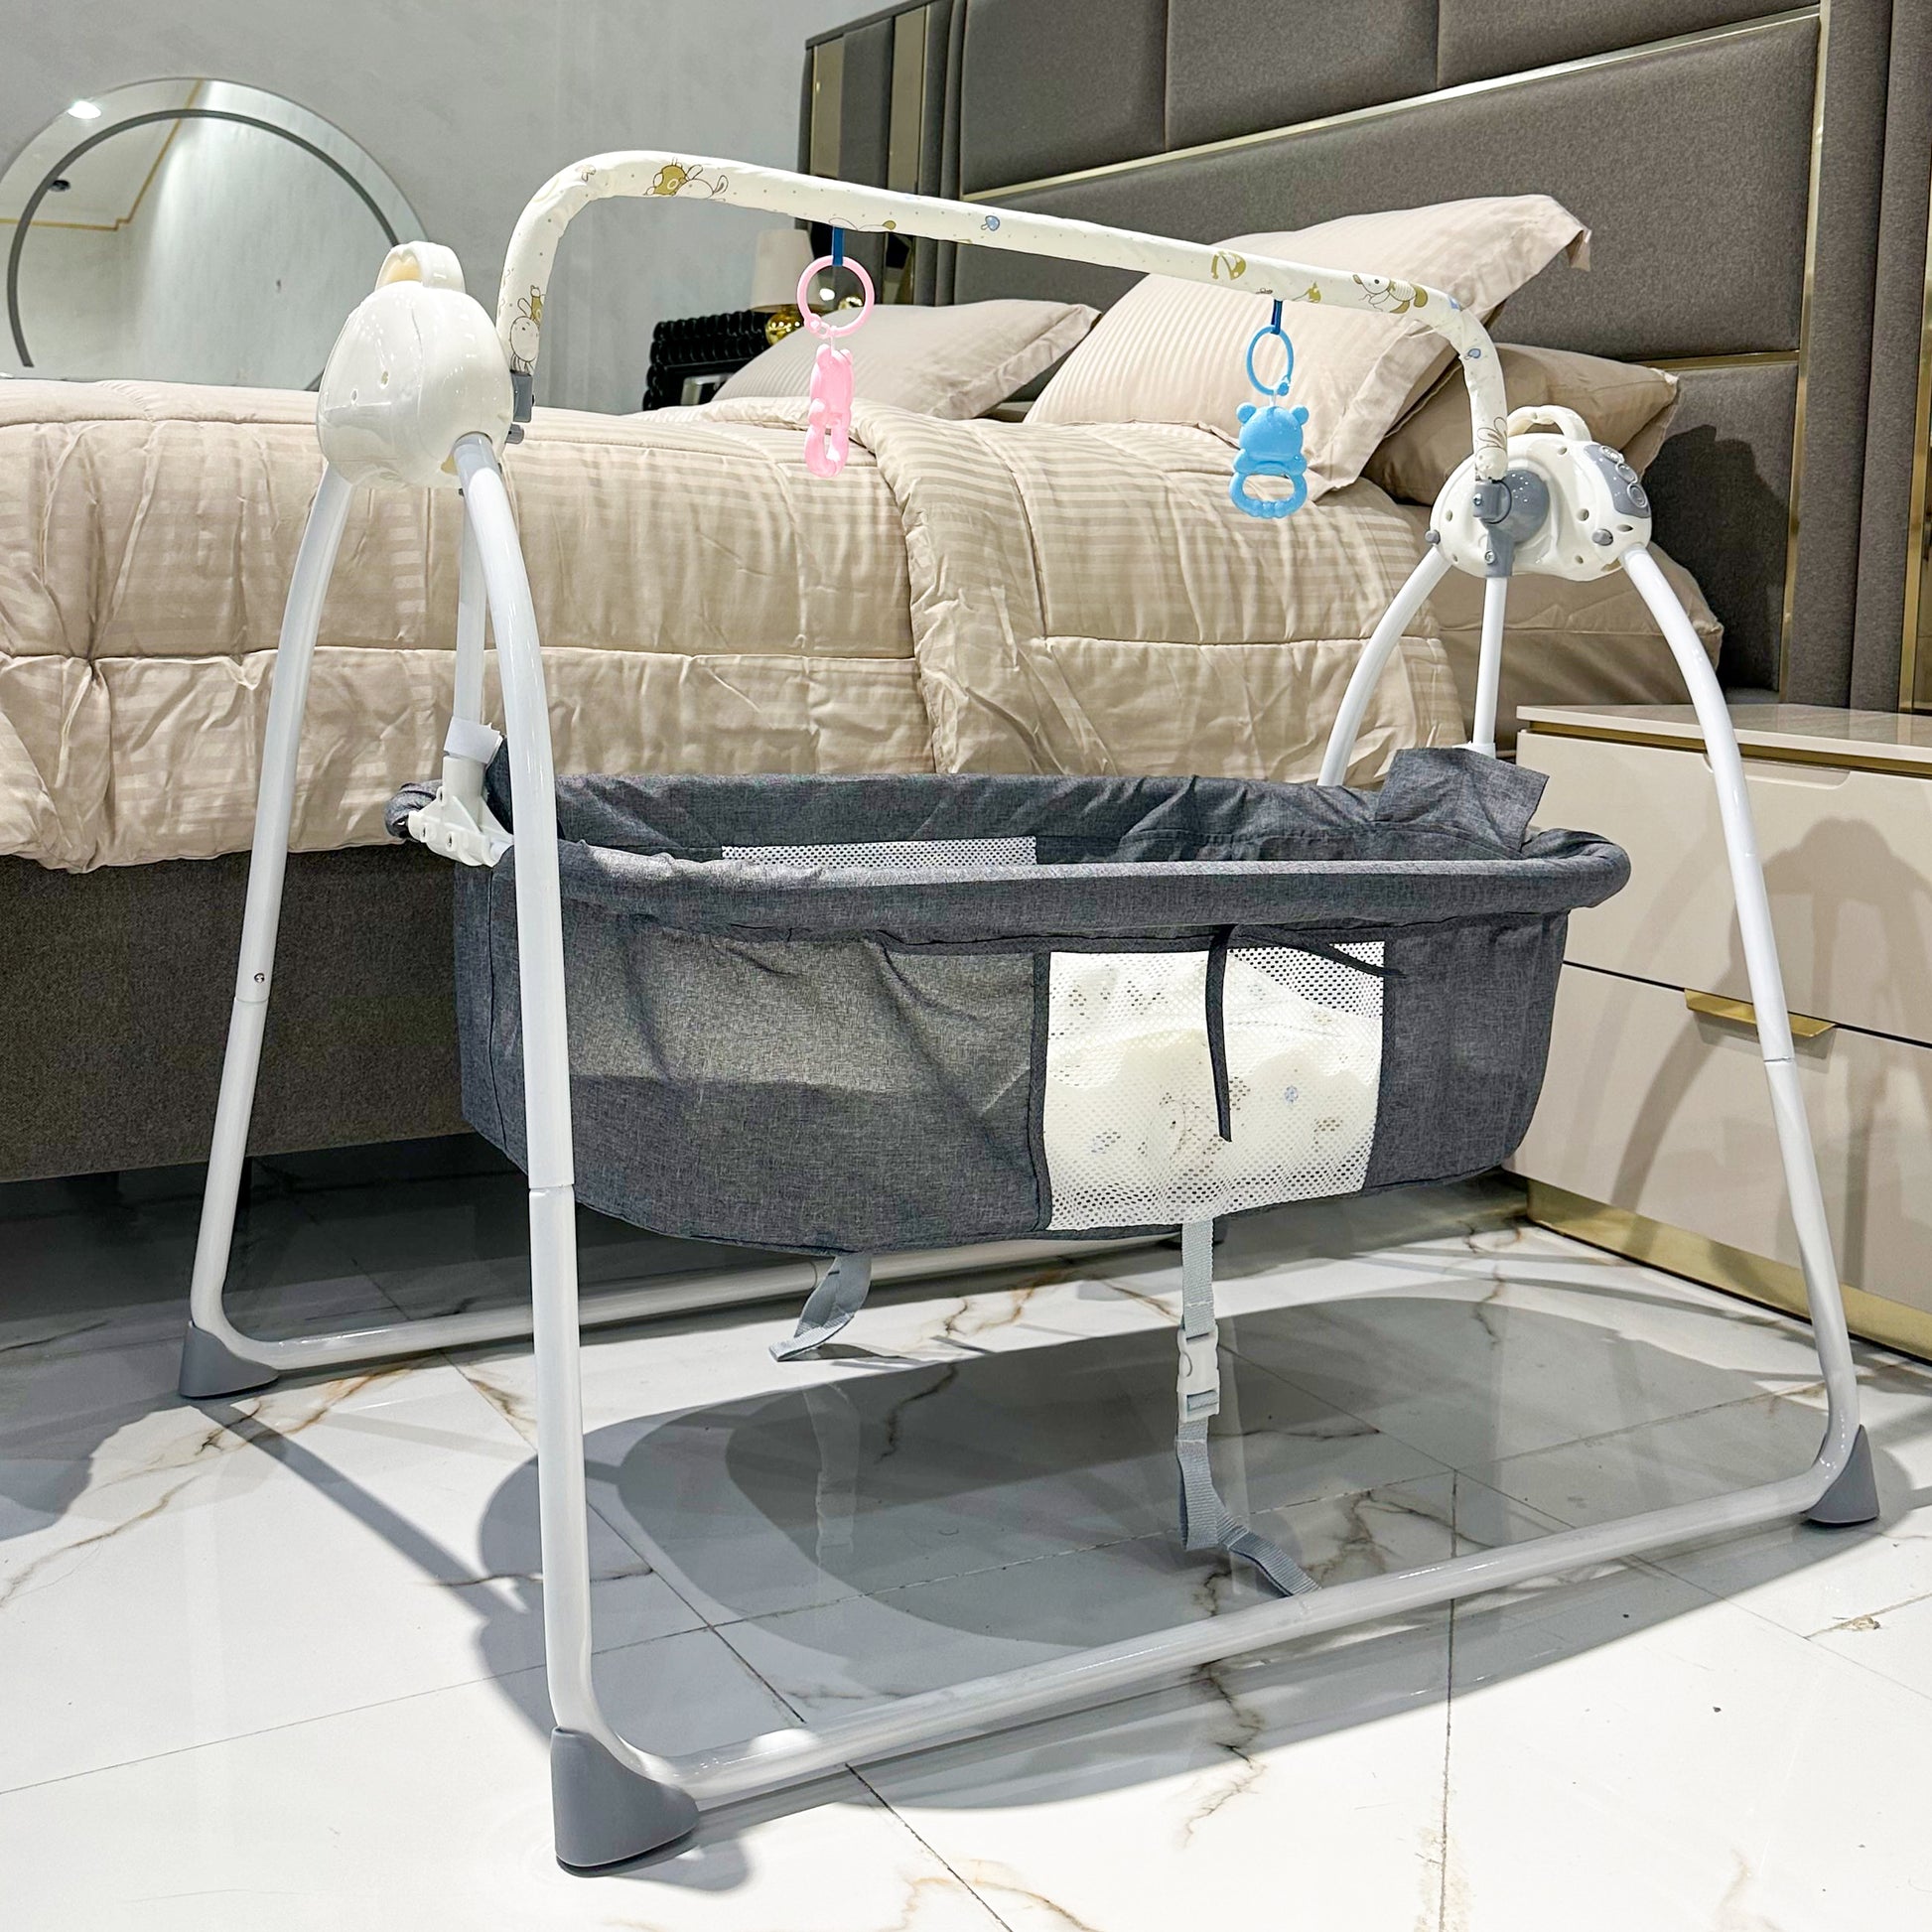 Electric Baby Cradles - Buy Electric Baby Cradles - hocc dubai - - baby playground outdoor- Shop baby product - Shop Pet product - shop home decor and lighting